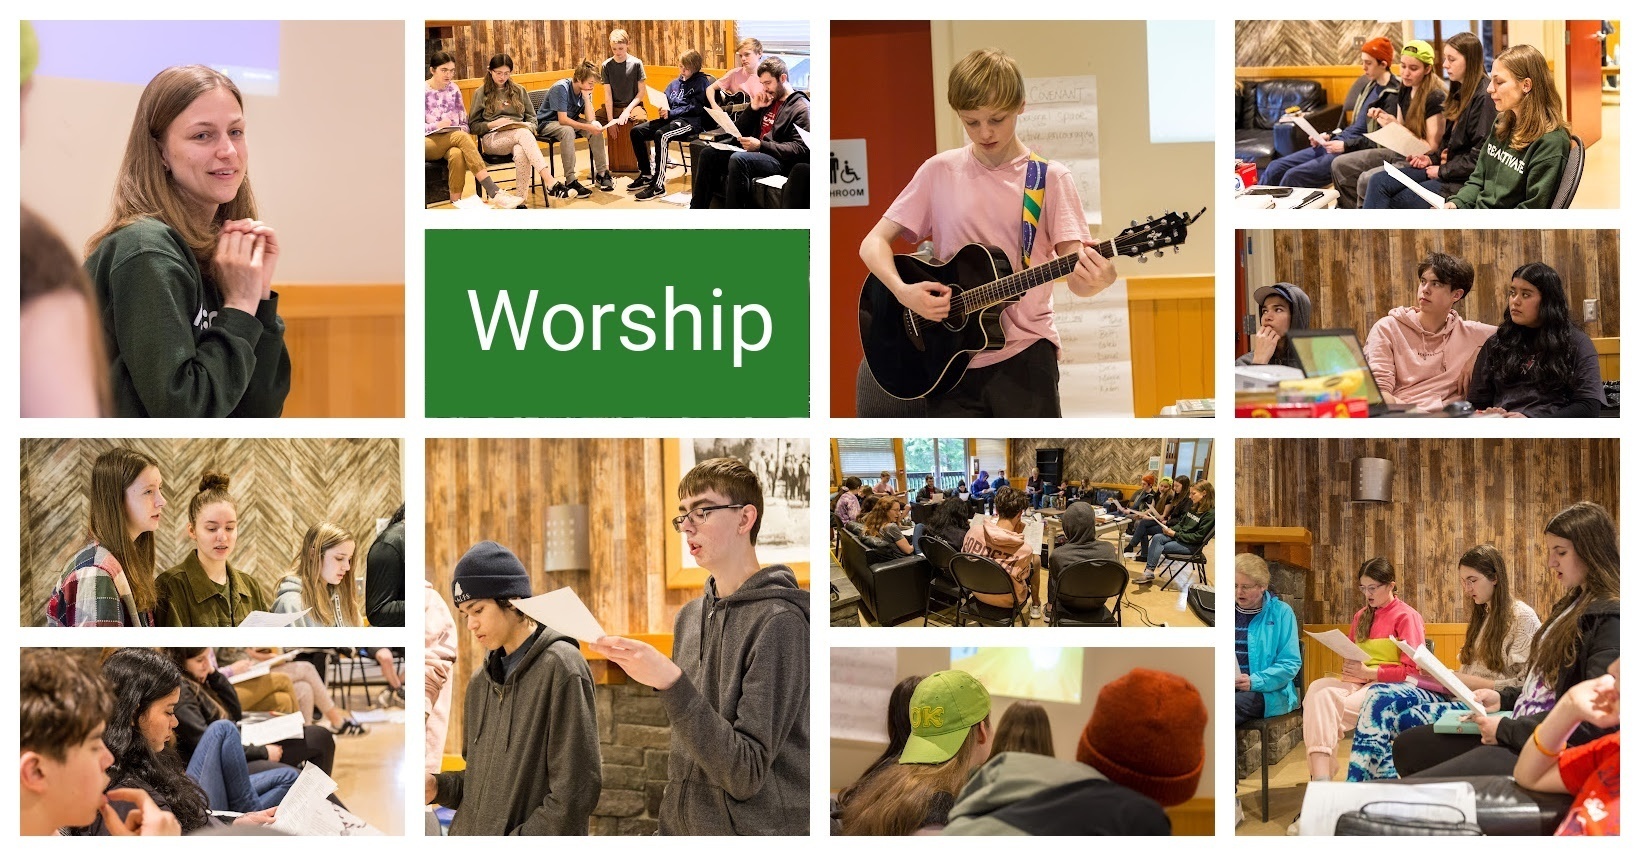 photos of youth worshipping